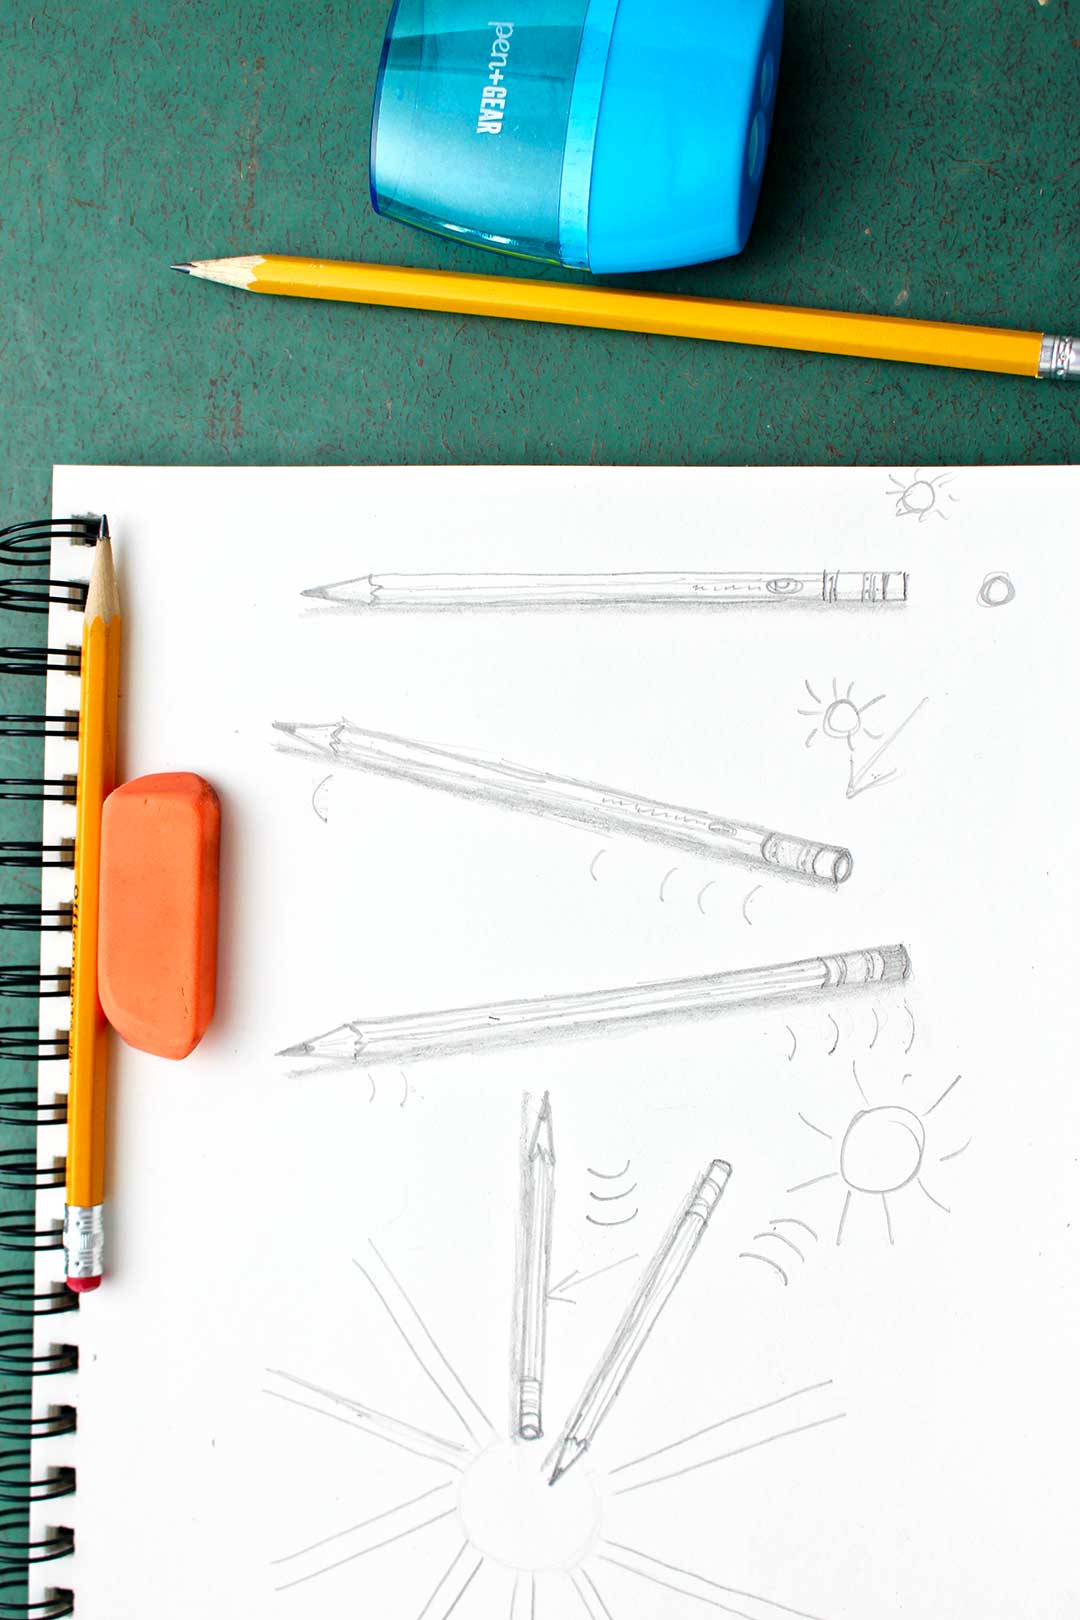 Five different sketches of pencils from different directions of angles.